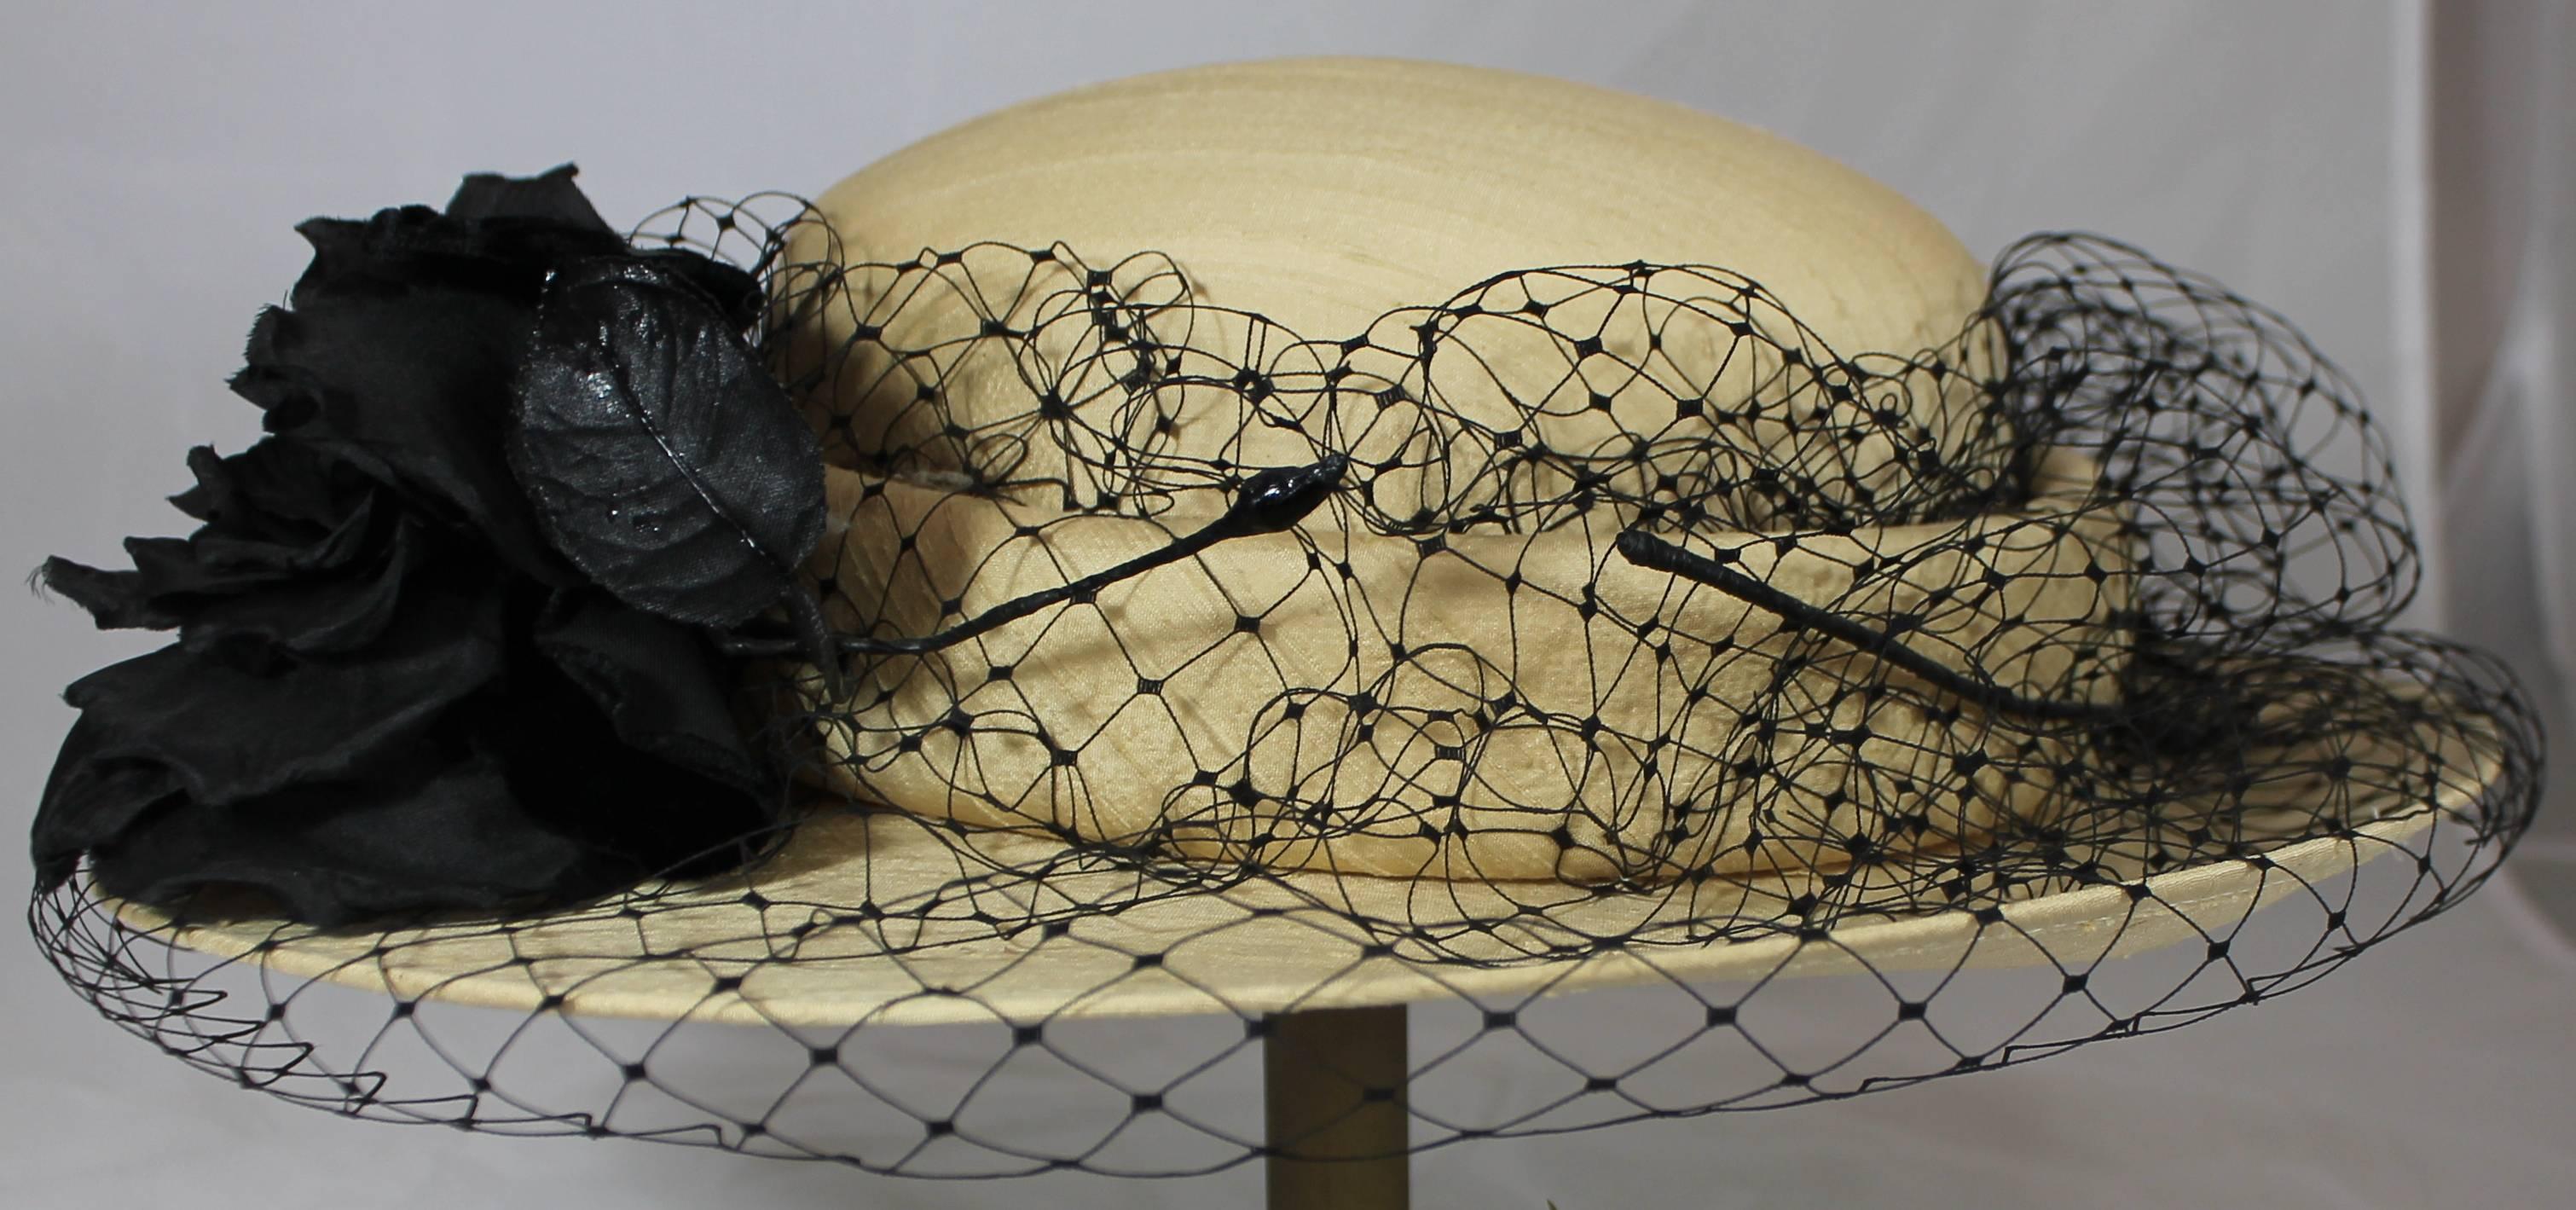 Suzanne Couture Millinery Beige Raw Silk Hat with Black Netting and Flower. This hat is a smooth beige silk and has black netting going around on top of the brim w/ leaves and a flower detail. It is in excellent